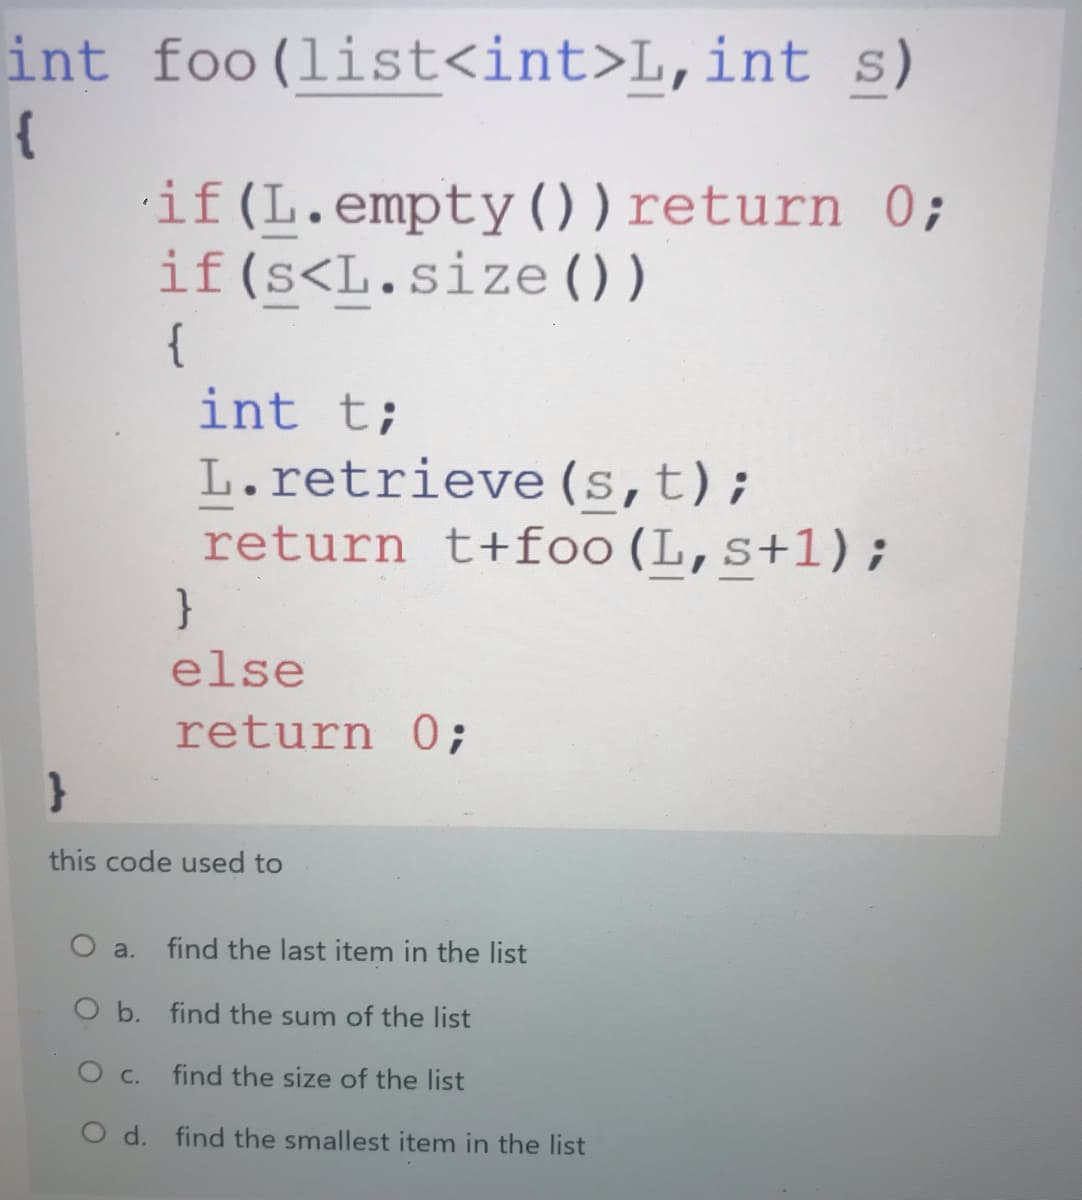 int s)
foo (list<int>L,int
{
if (L.empty() ) return 0;
if(s<L.size () )
{
int t;
L.retrieve (s,t);
return t+foo(L,s+1);
}
else
return 0;
this code used to
find the last item in the list
O a.
O b. find the sum of the list
O c.
find the size of the list
O d. find the smallest item in the list
